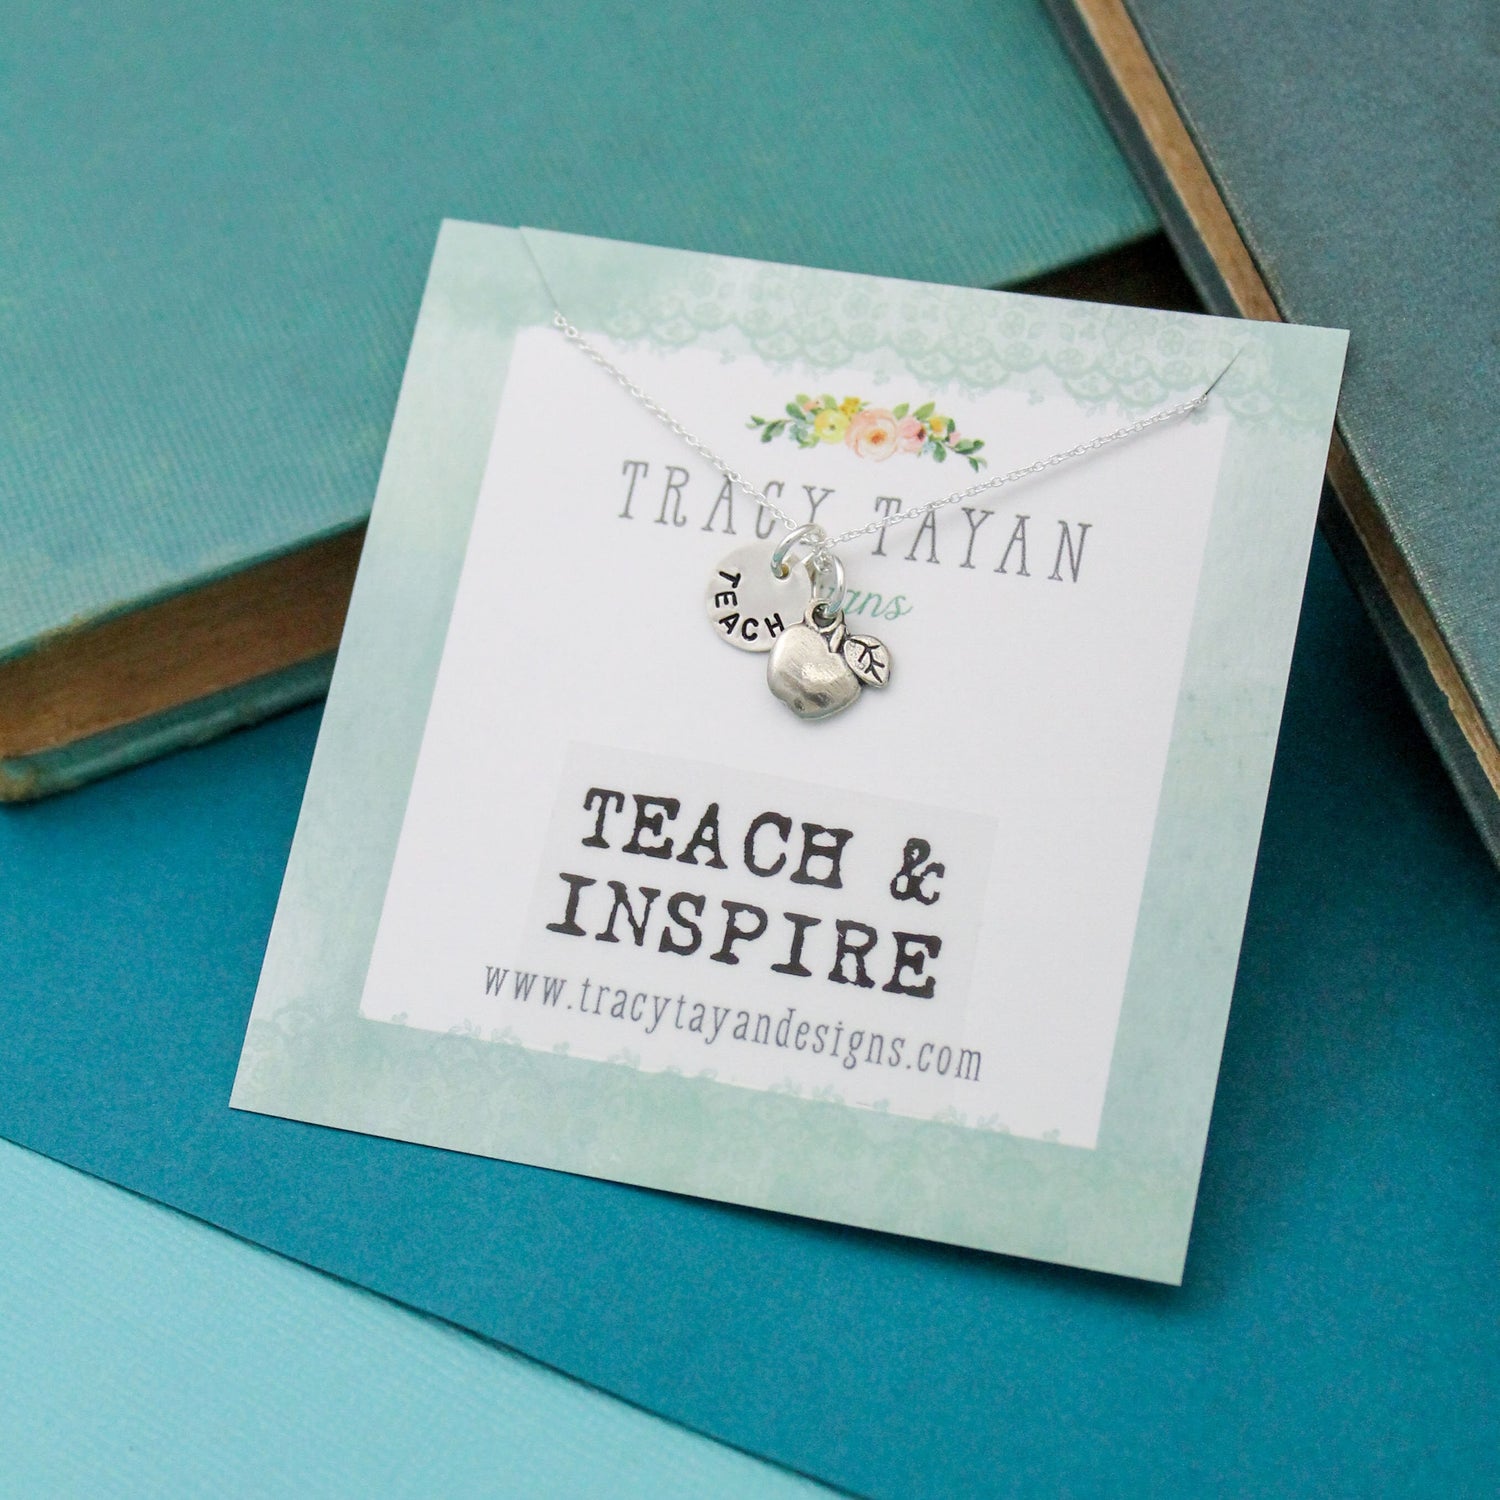 Teach & Inspire Necklace Personalized Sterling Silver, Hand Stamped Jewelry, Teacher Jewelry, Teacher Box Gift, Hand-Stamped Teacher Gift